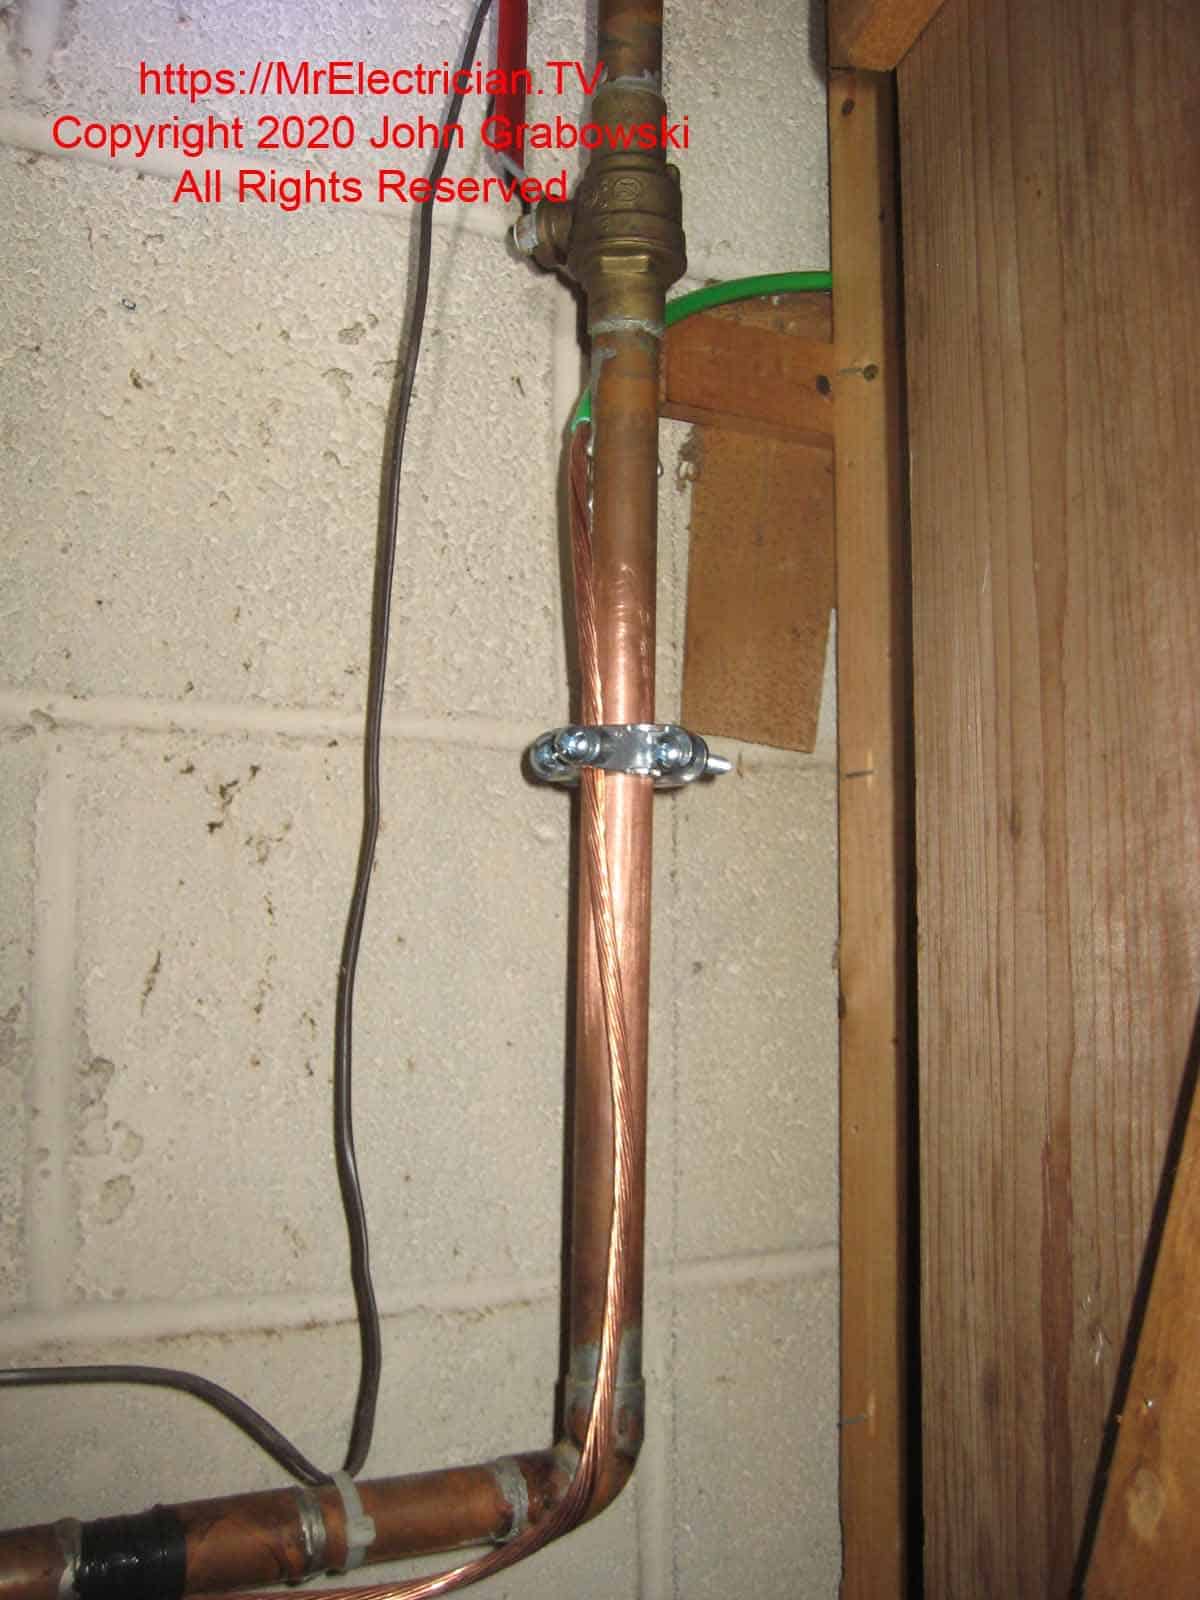 A clean copper water pipe after the water meter with a new ground clamp and new grounding electrode conductor attached